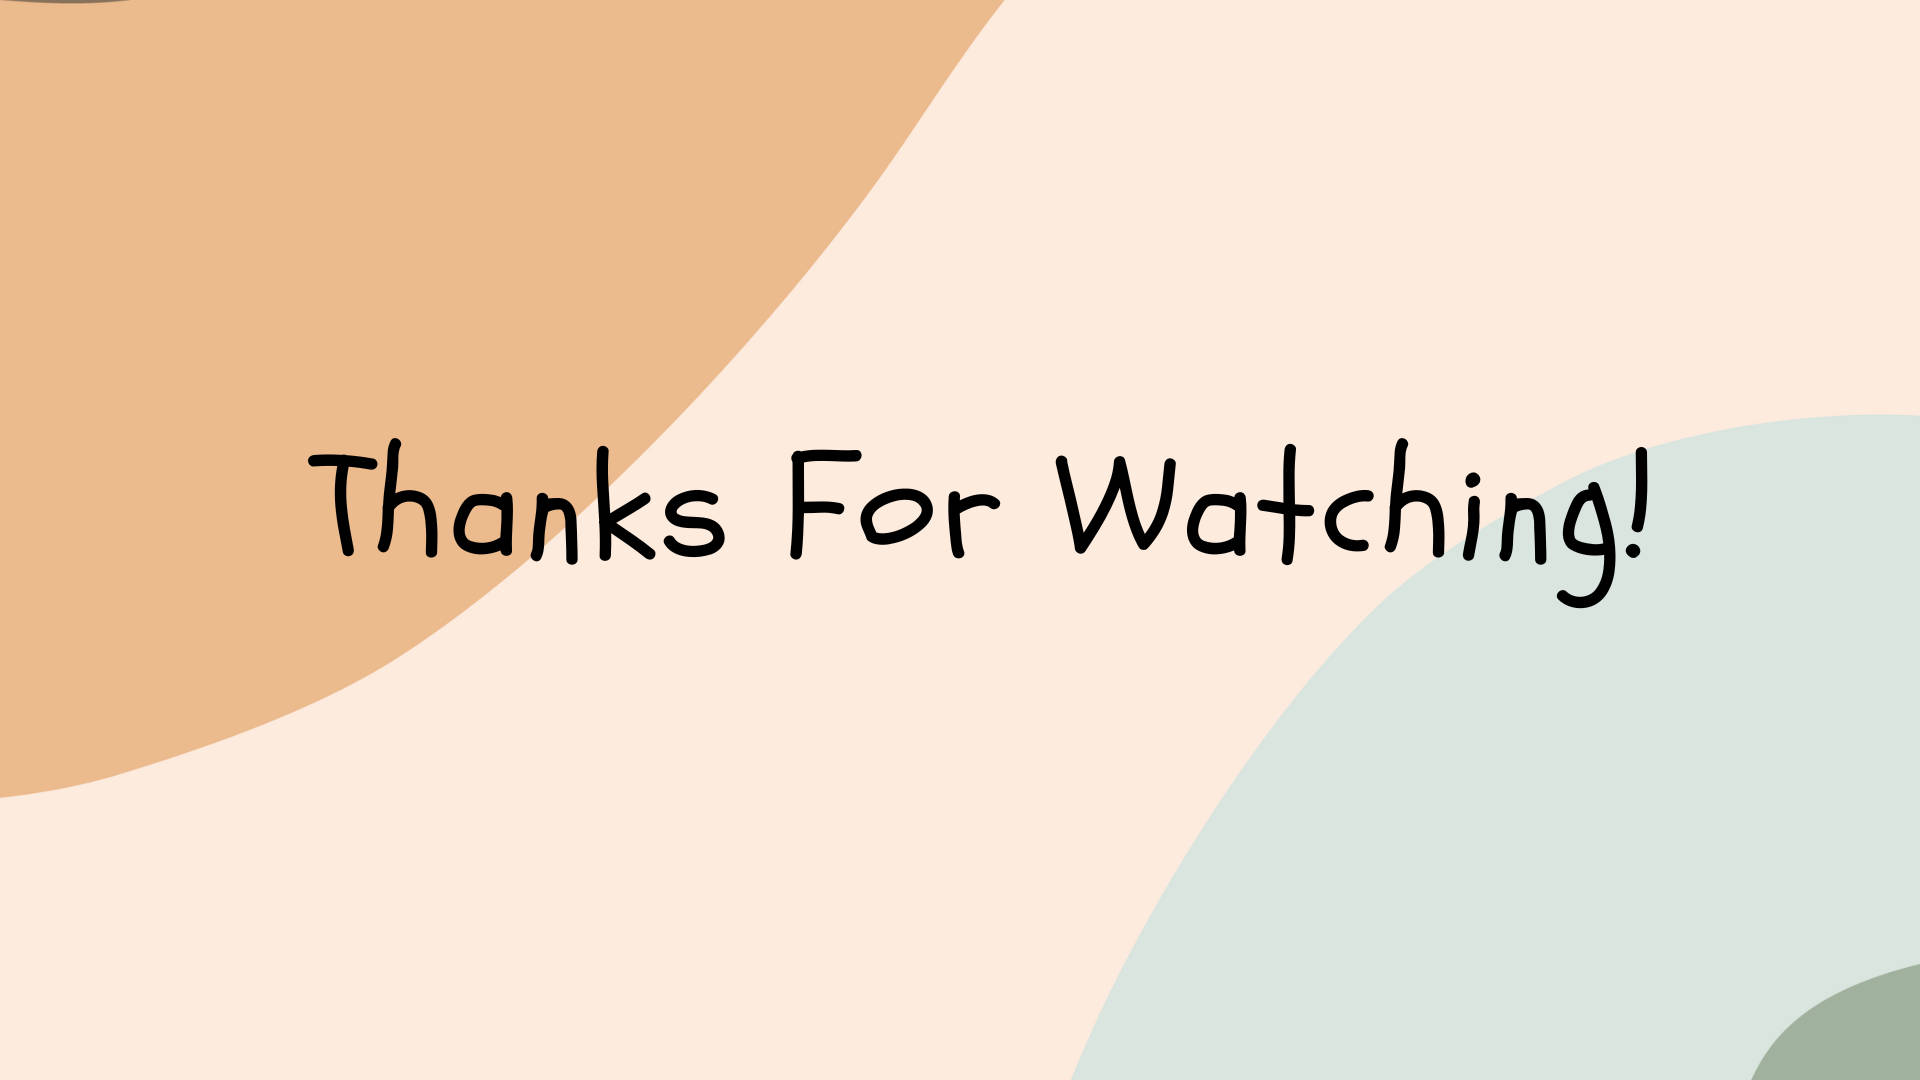 Captivating Thank You For Watching Message in Pastel Background Wallpaper